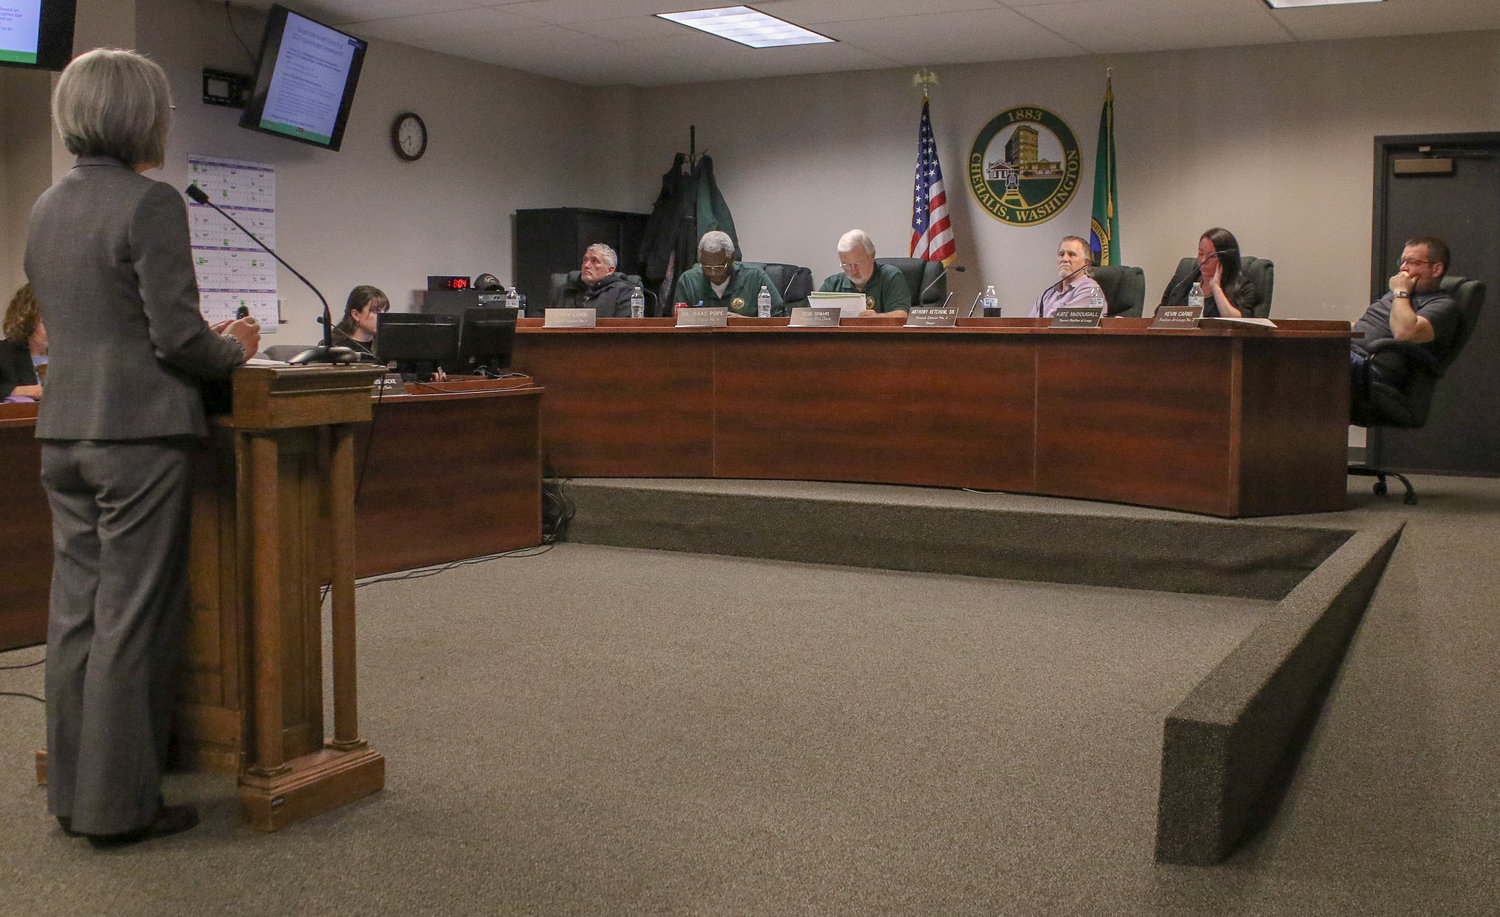 Chehalis City Finance Director Chun Saul explains the details of an amendment to the fiscal year 2022 budget to the city council during Monday night's regular meeting.